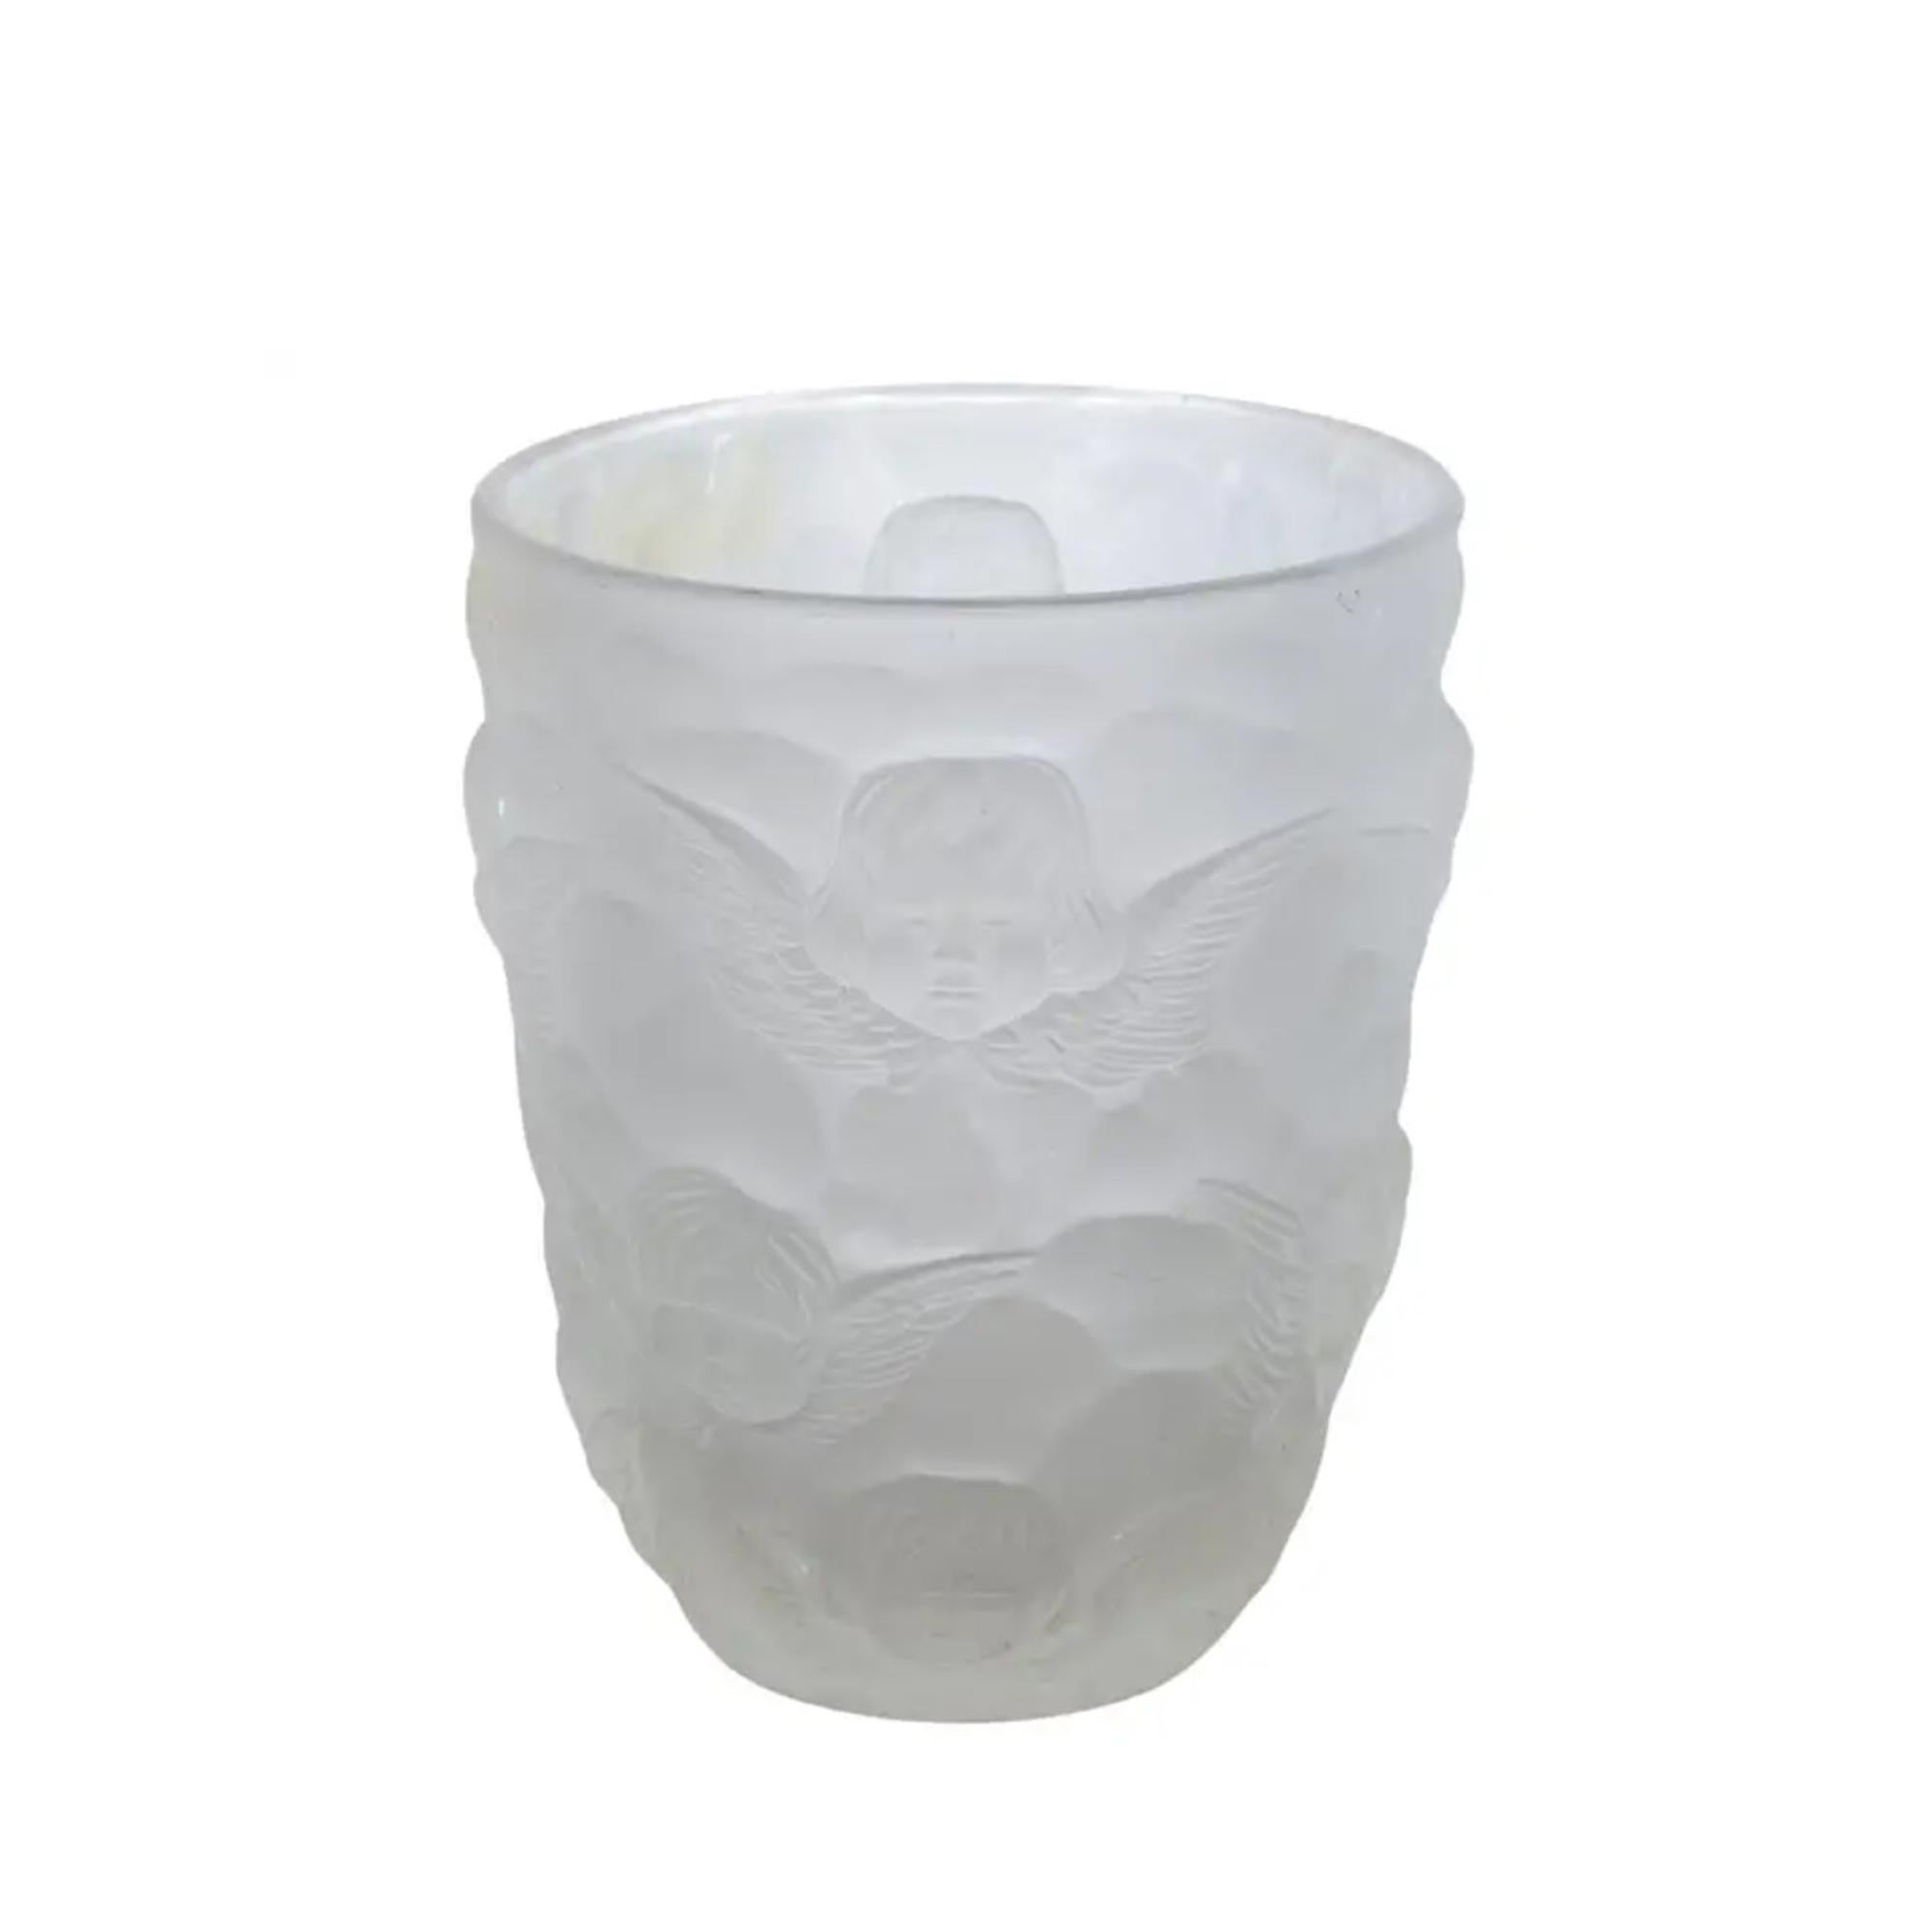 Cherub-Relief Frosted Glass Vase: Artistic Elegance for Home or Collection For Sale 2